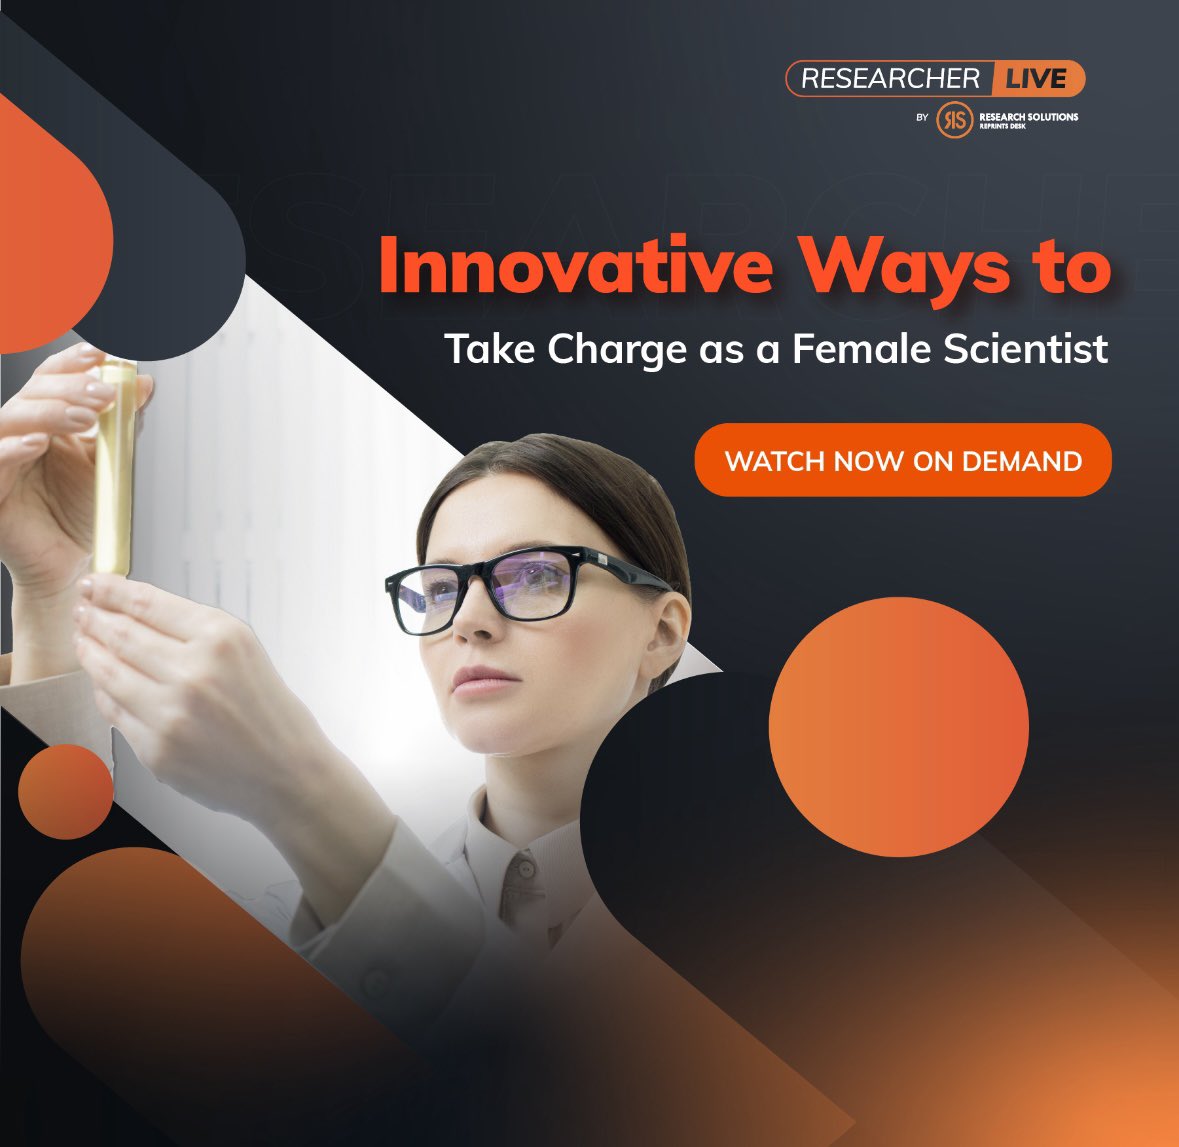 #IDWGS reminds us of the critical role women play in shaping innovative solutions for a better world.

“By advancing the cause of women, we can drive progress in science.” @AAzoulay 

Get inspired with our on-demand episode of #ResearcherLive 👇

researchsolutions.com/researcherlive